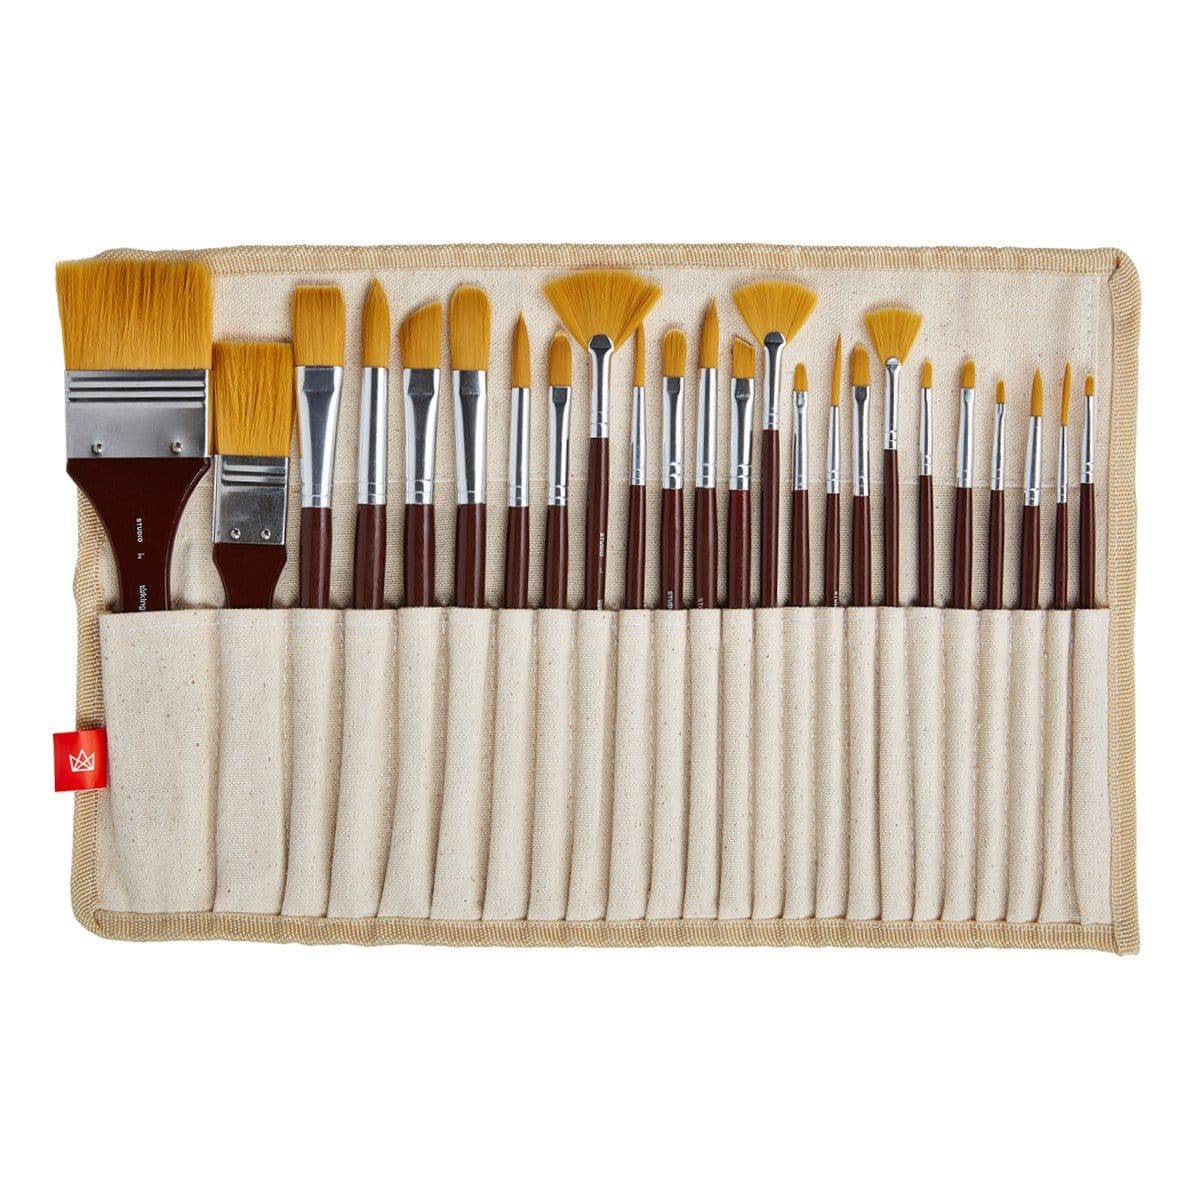 KINGART 1050A Premium 6 Pc. Flat Oval Mop Artist Brush Set, White  Super-Soft Natural Goat Hair, Short Handle, 6 Sizes for Oil, Acrylic and  Watercolor